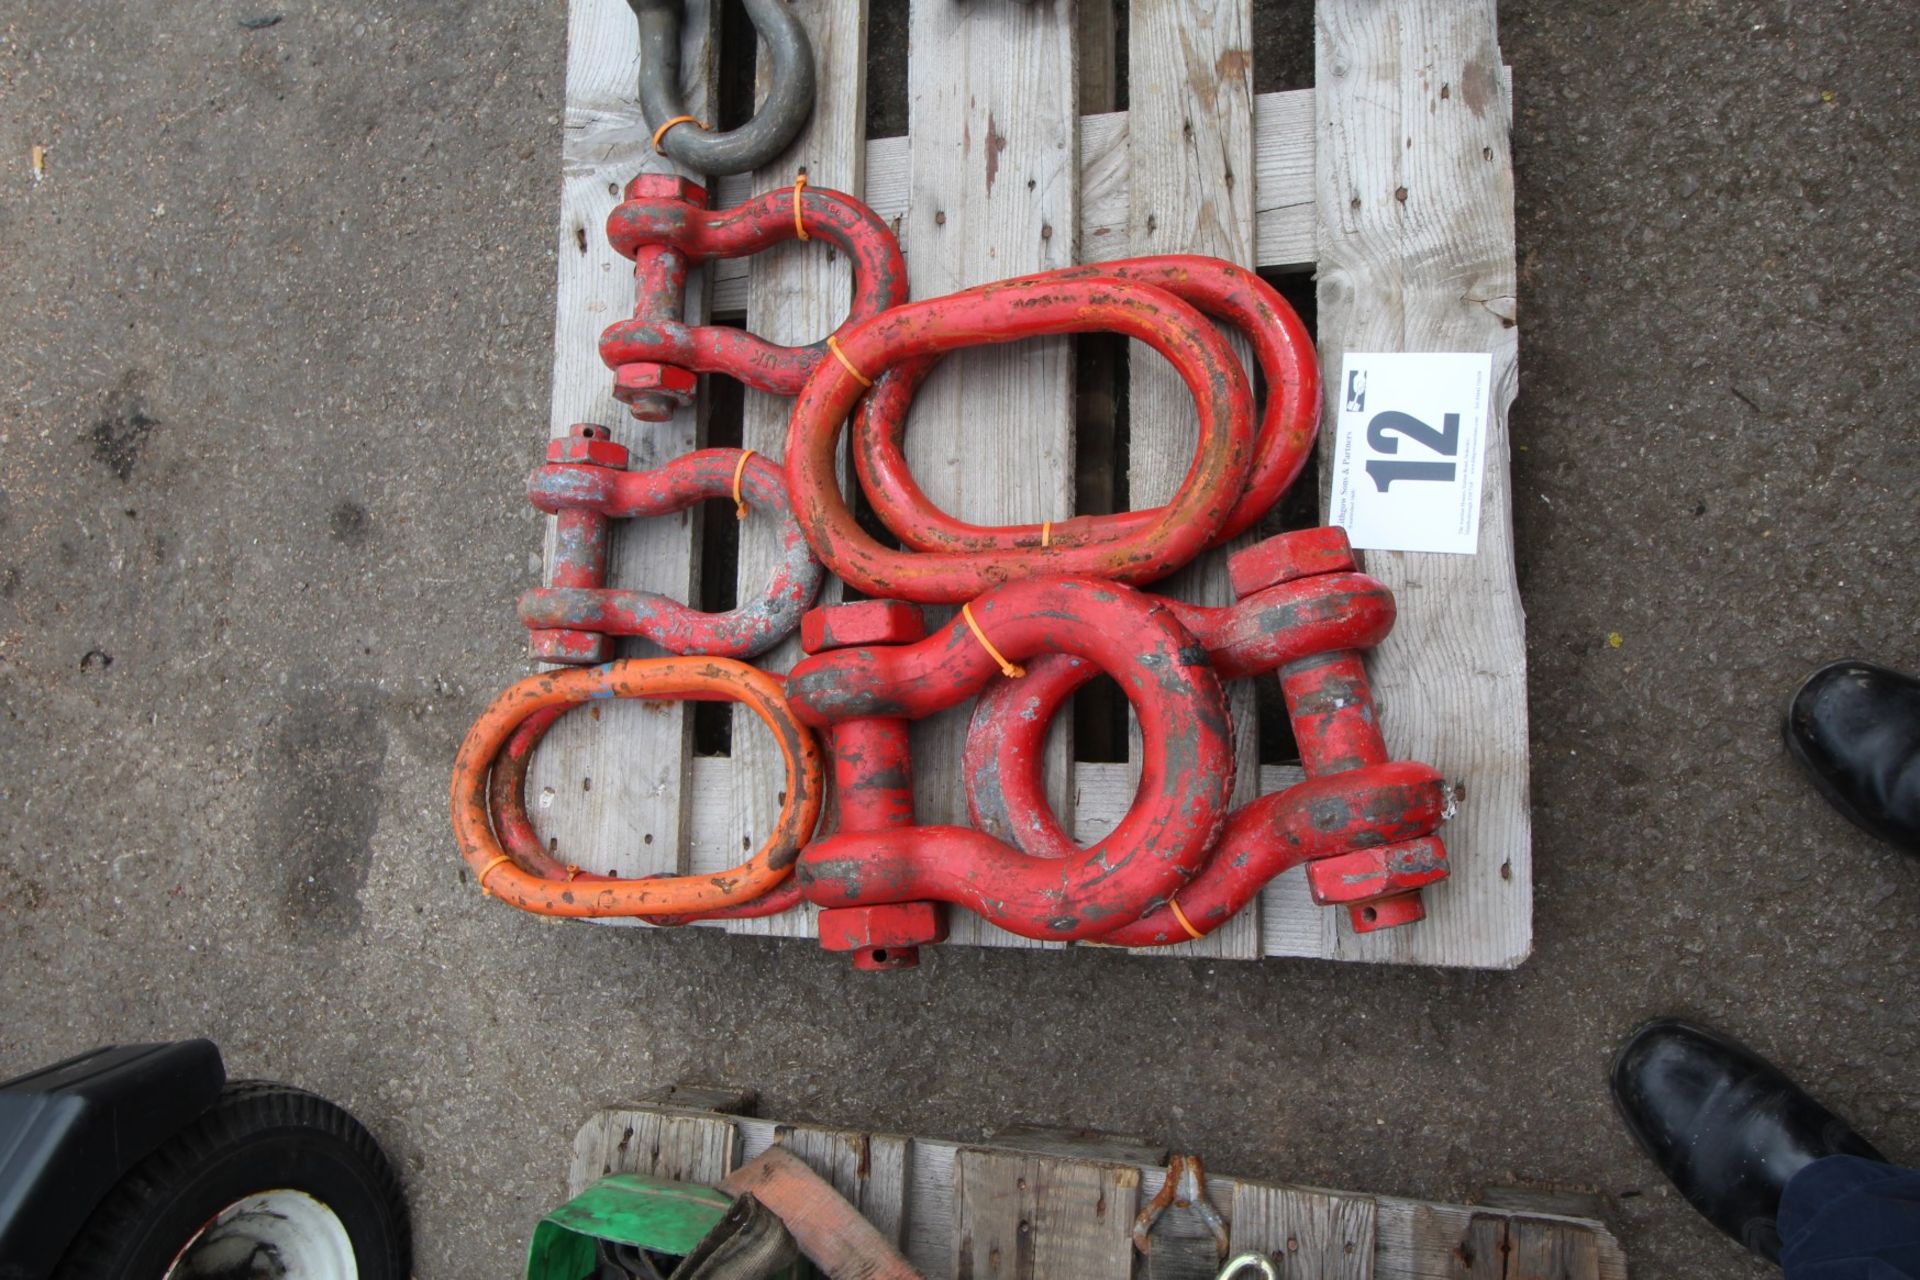 CONTENTS ON HALF PALLET OF 4 RED PAINTED HEAVY SHACKLES & 4 RED PAINTED LIFTING RINGS